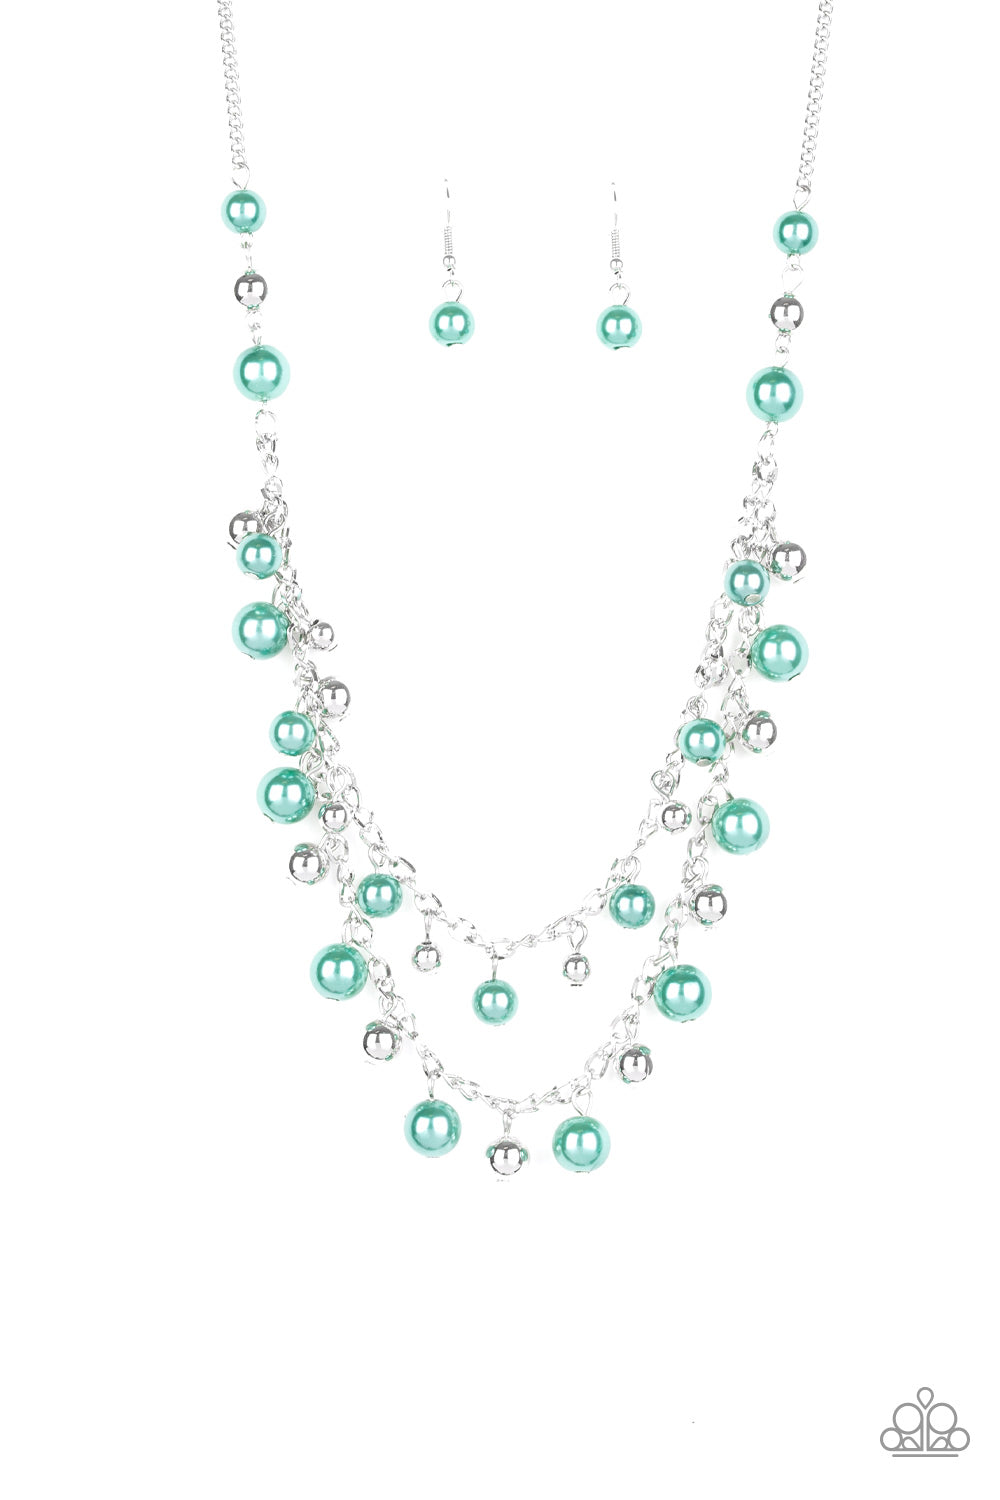 Fantastic Flair Necklace__Green